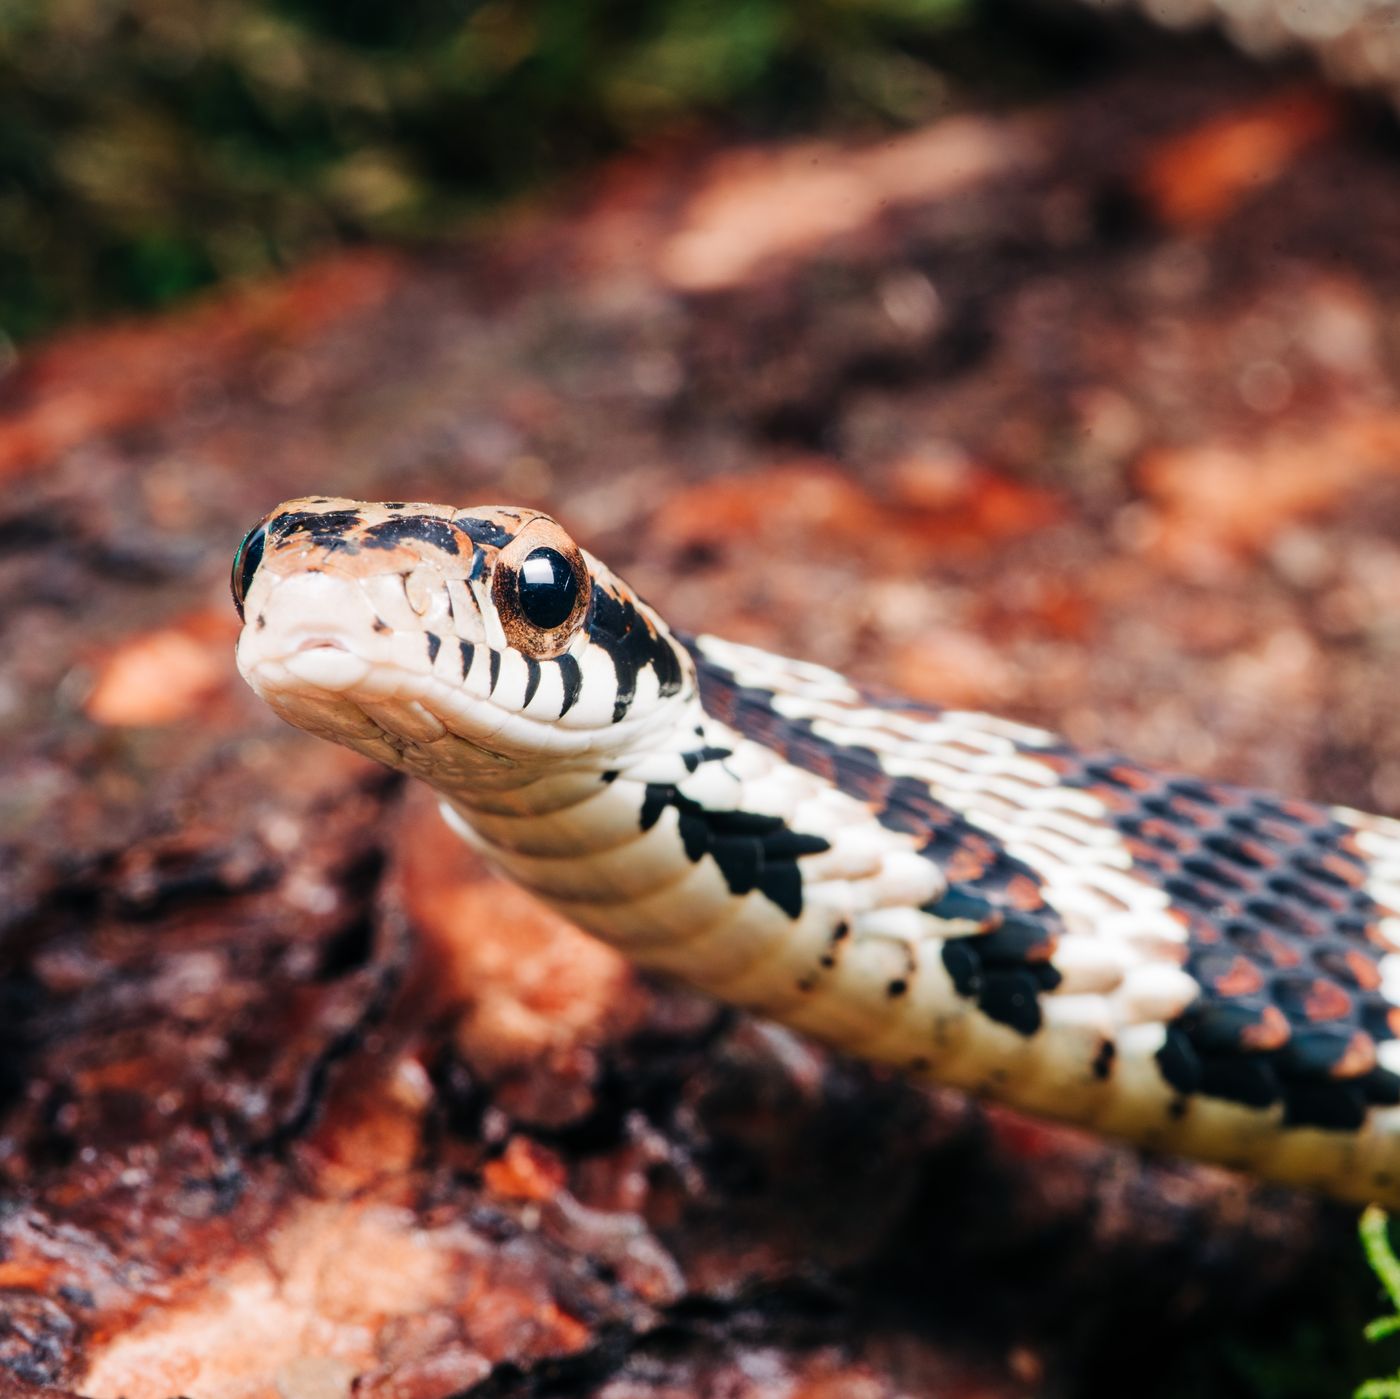 Dreams About Snakes: What Do They Mean? An Expert Reveals